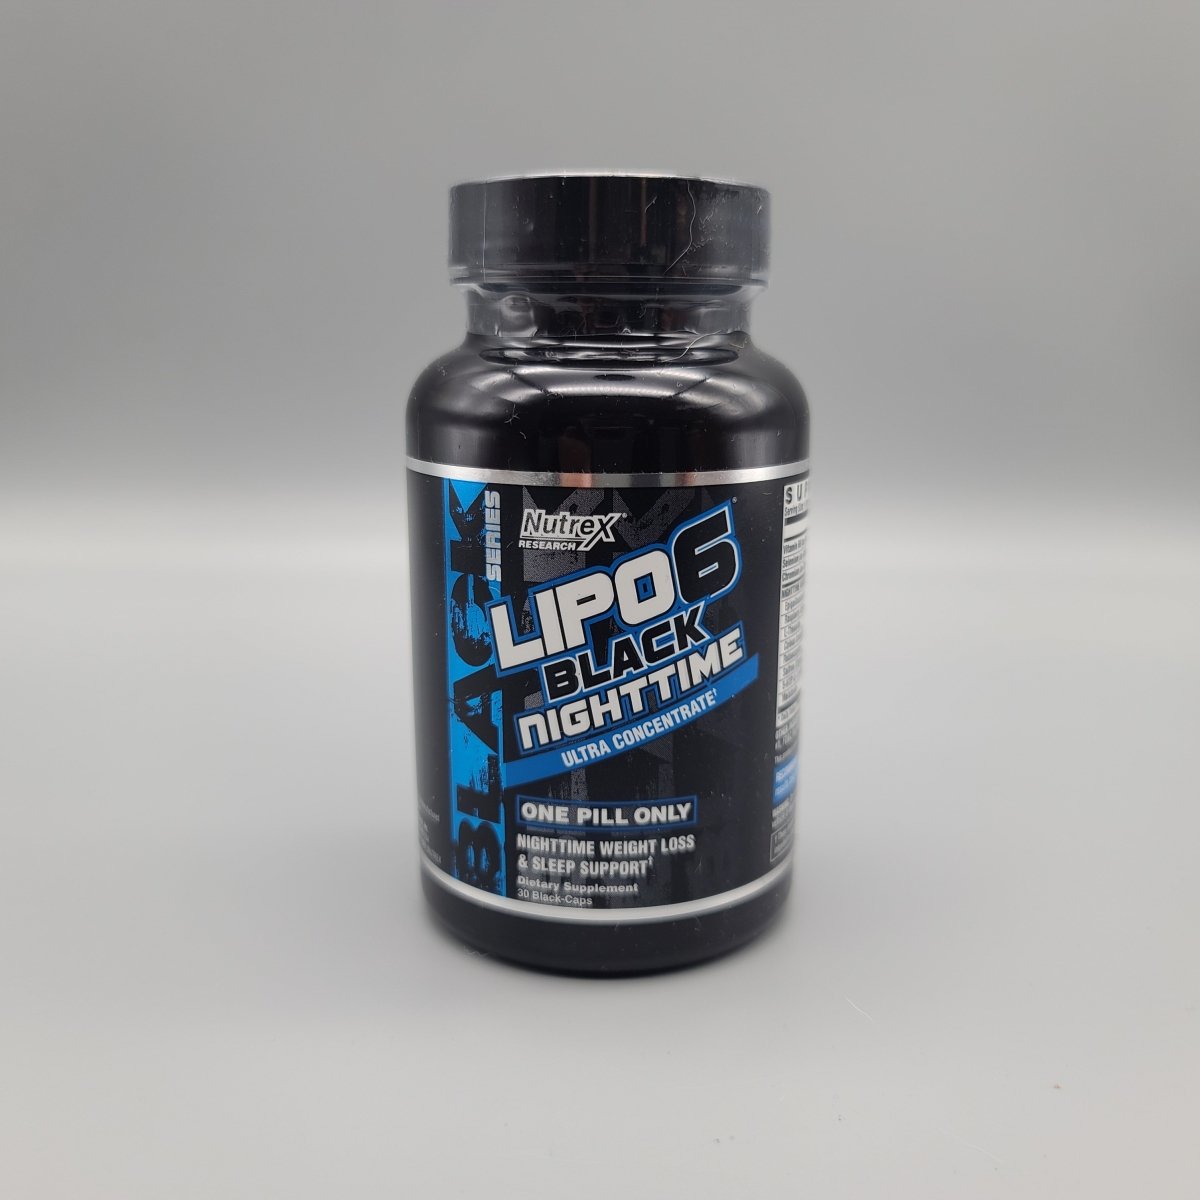 Lipo 6 - Black Nighttime - Ultra Concentrate - Weight Loss & Sleep Support - 60 Capsules